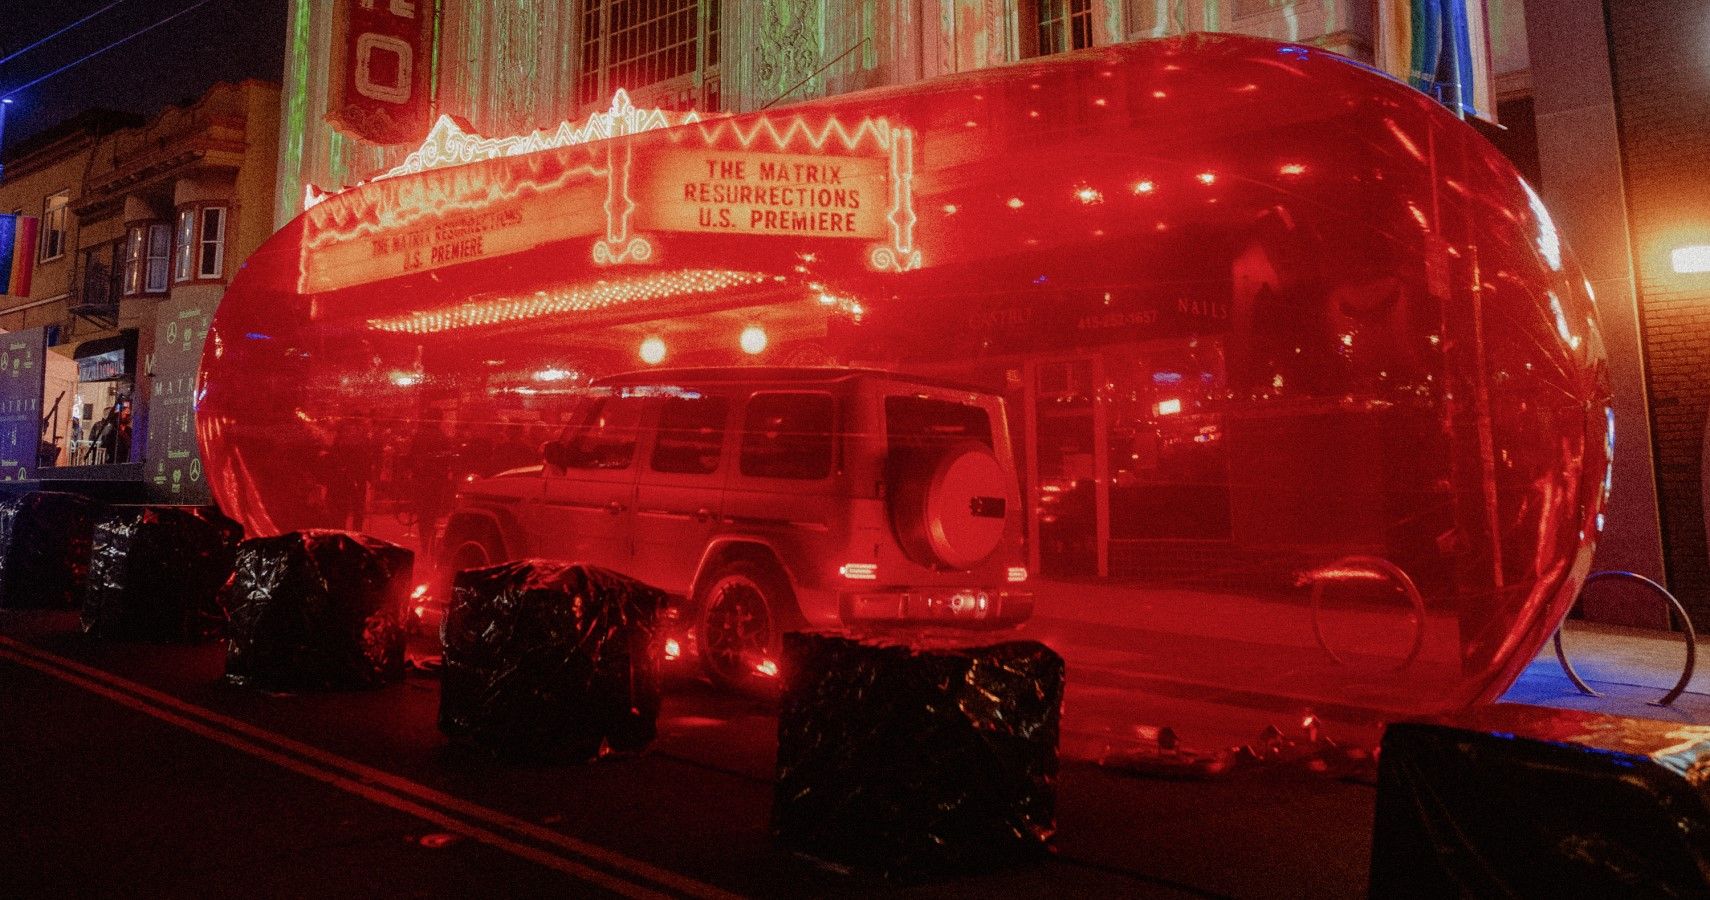 A G-Class in a red pill at the Matrix Resurrections premiere